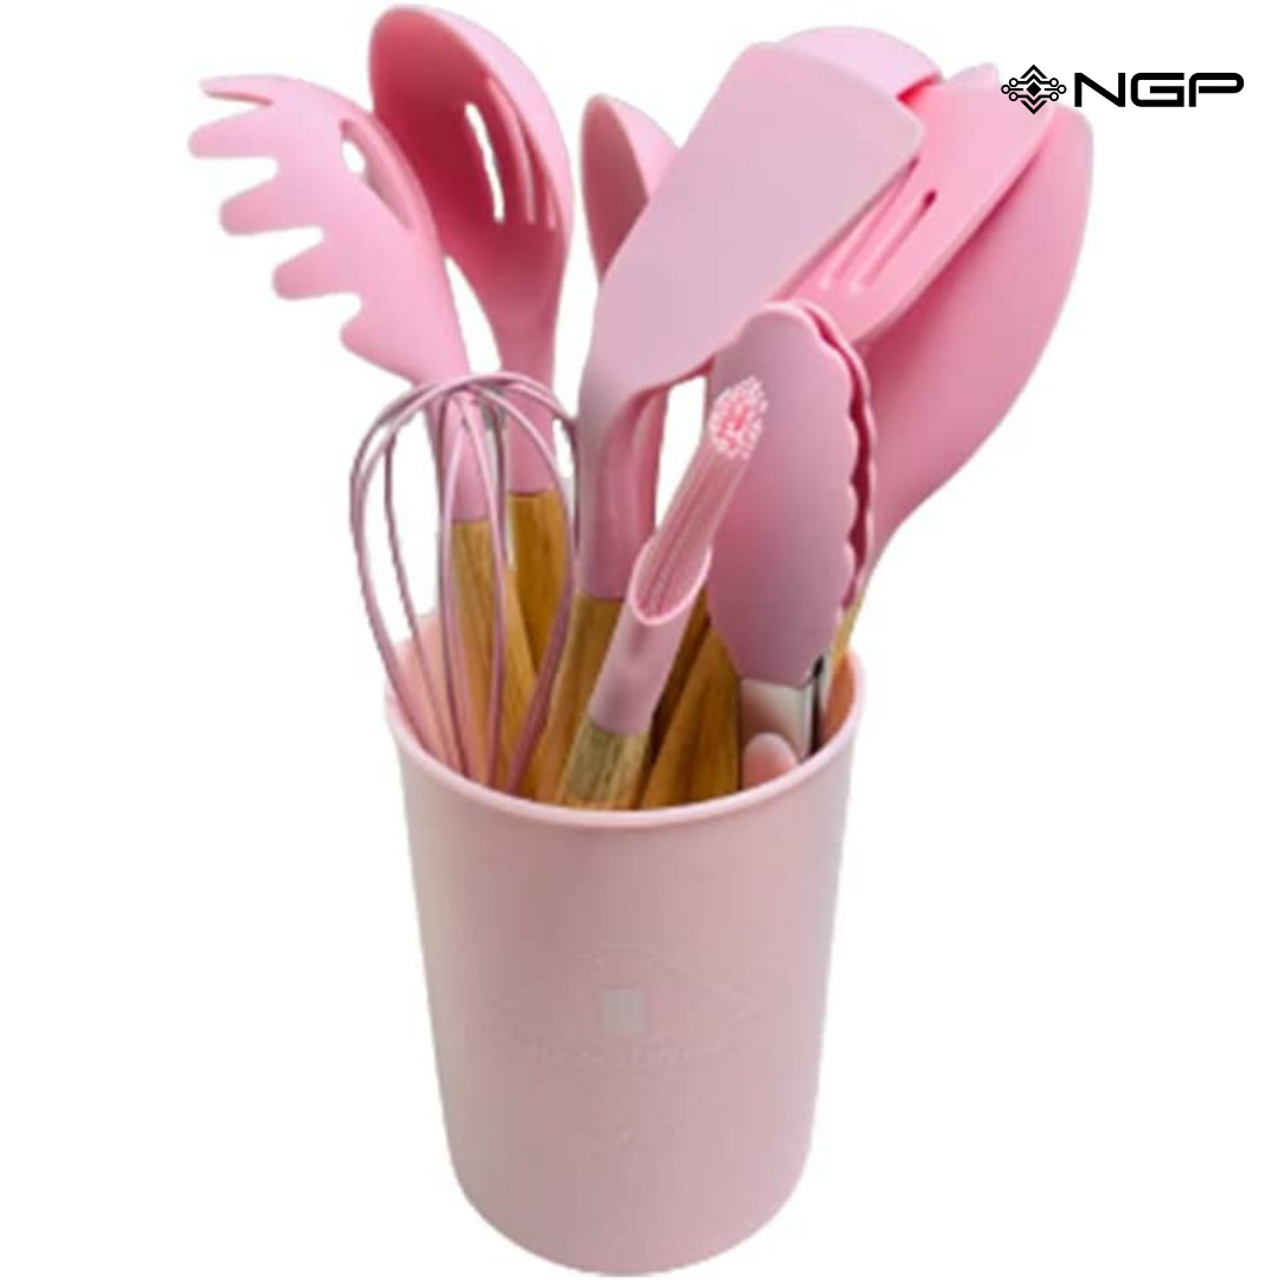 Kitchen Utensil Set - Premium Silicone Cooking Utensils - Nonstick Kitchen  Utensils - Kitchen Gadgets Cookware Set - Best Kitchen Tool Set for Baking  Cooking & Mixing,Pink Duck Tongue Scraper 